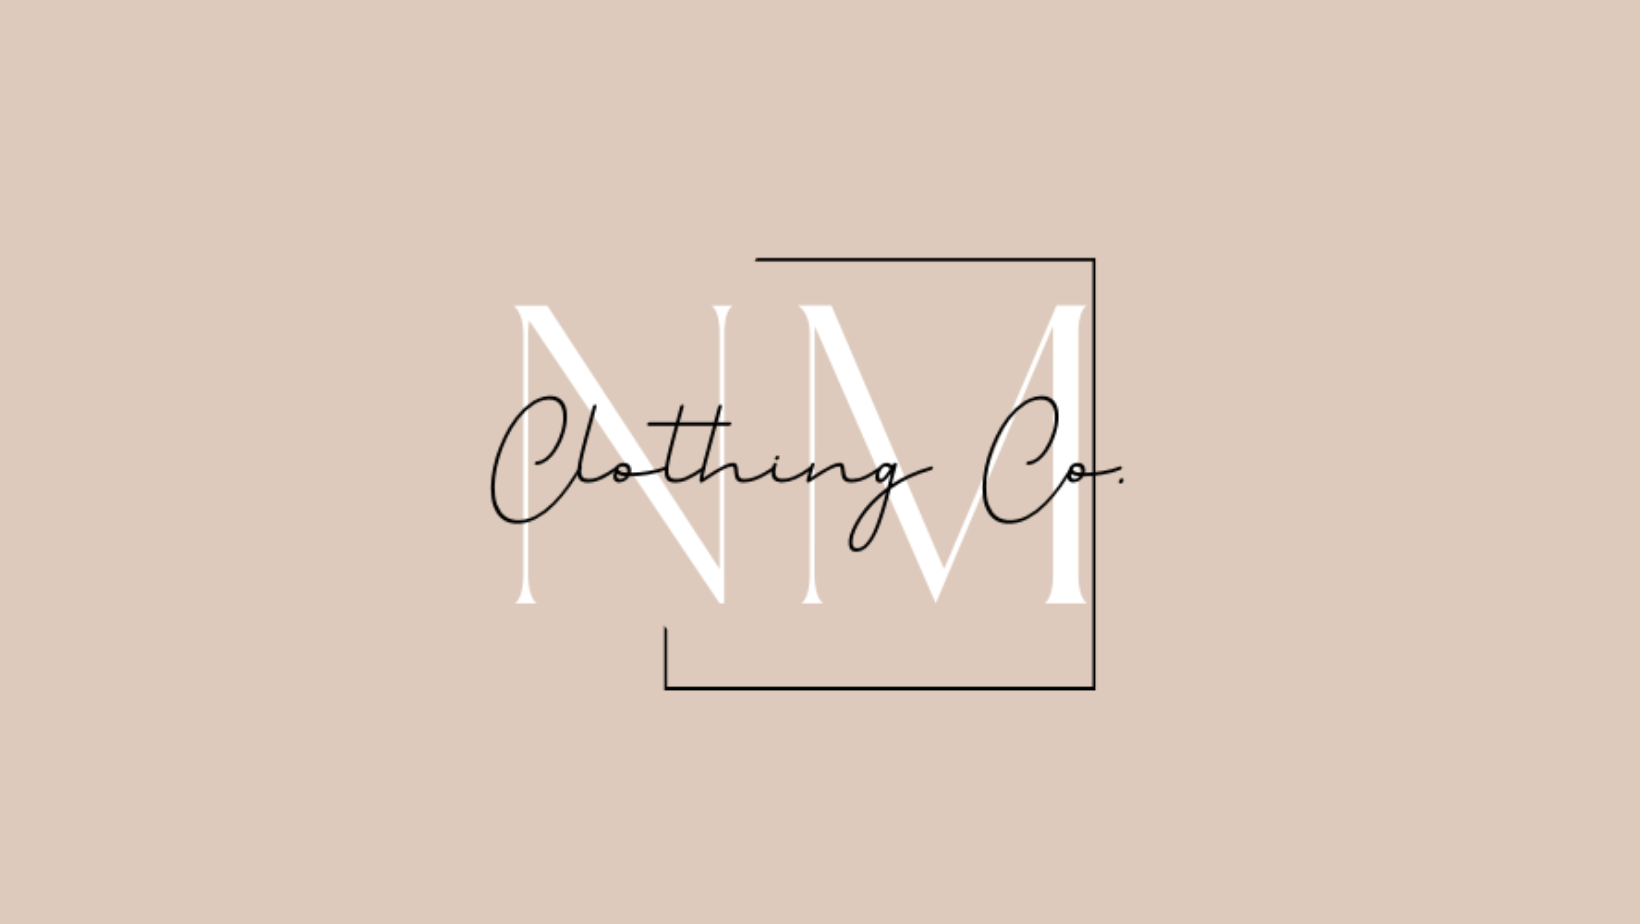 NM Clothing Co.